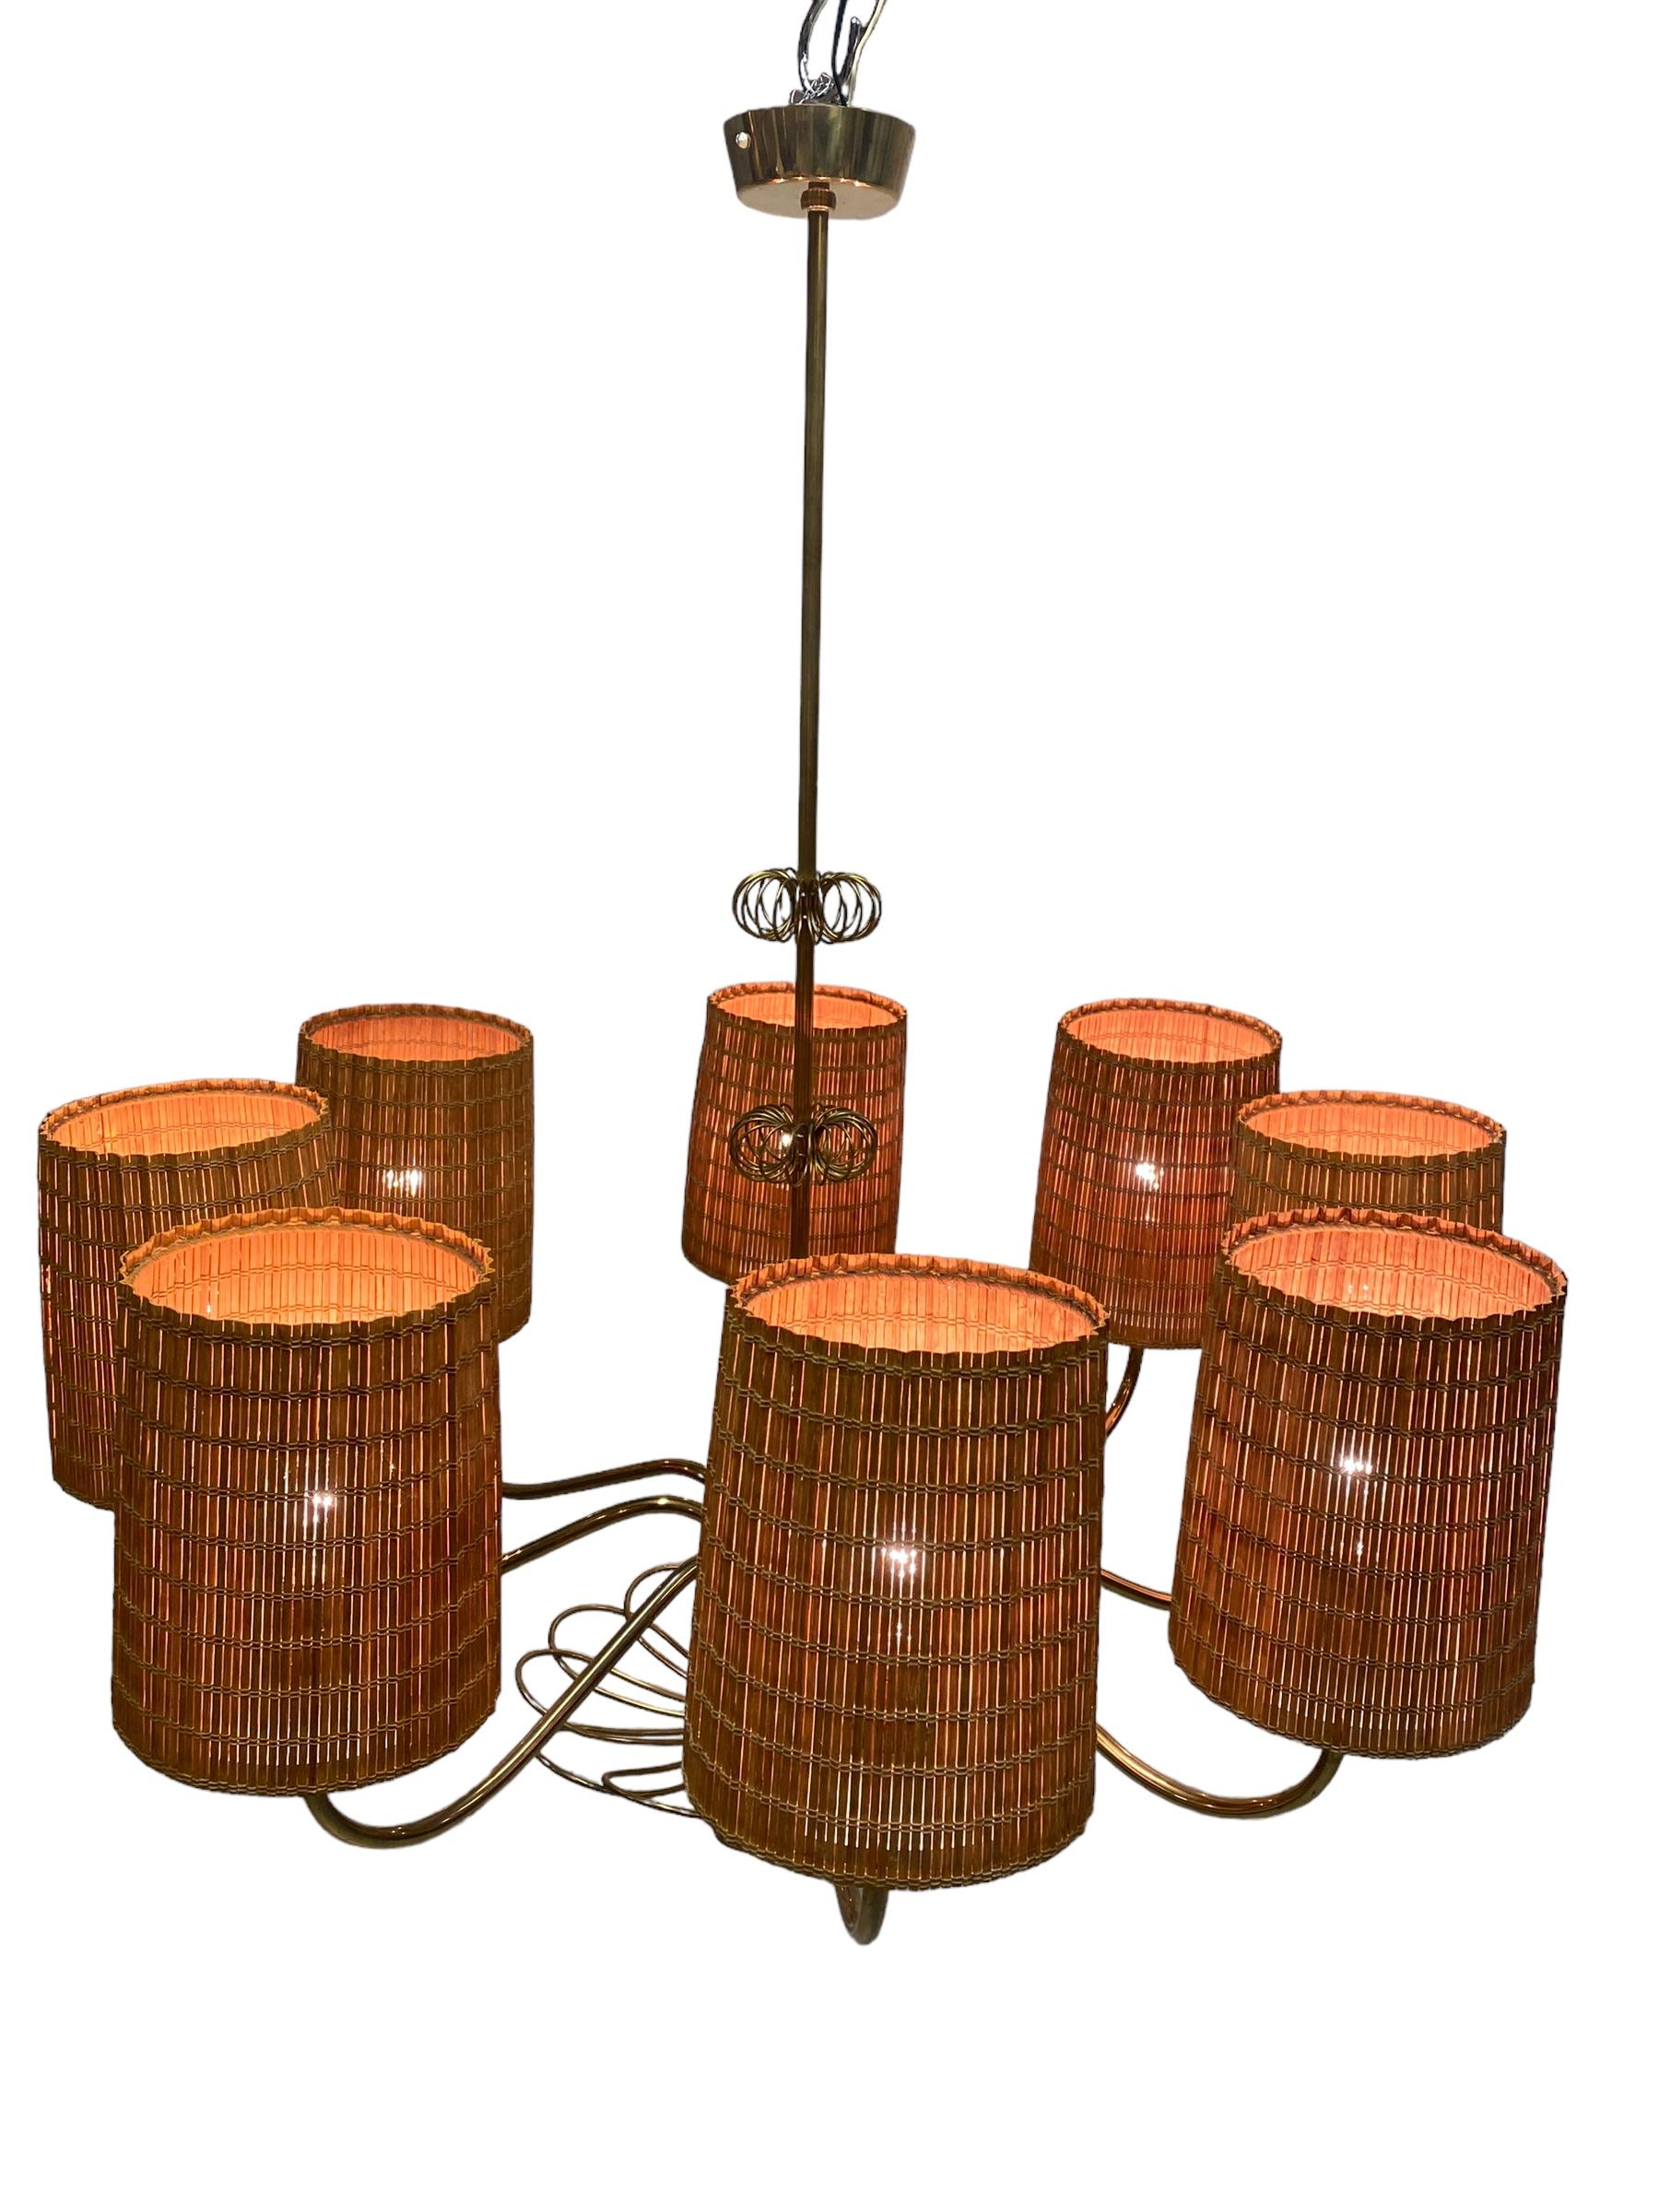 Scandinavian Modern A Paavo Tynell Commissioned Chandelier, 1950s For Sale